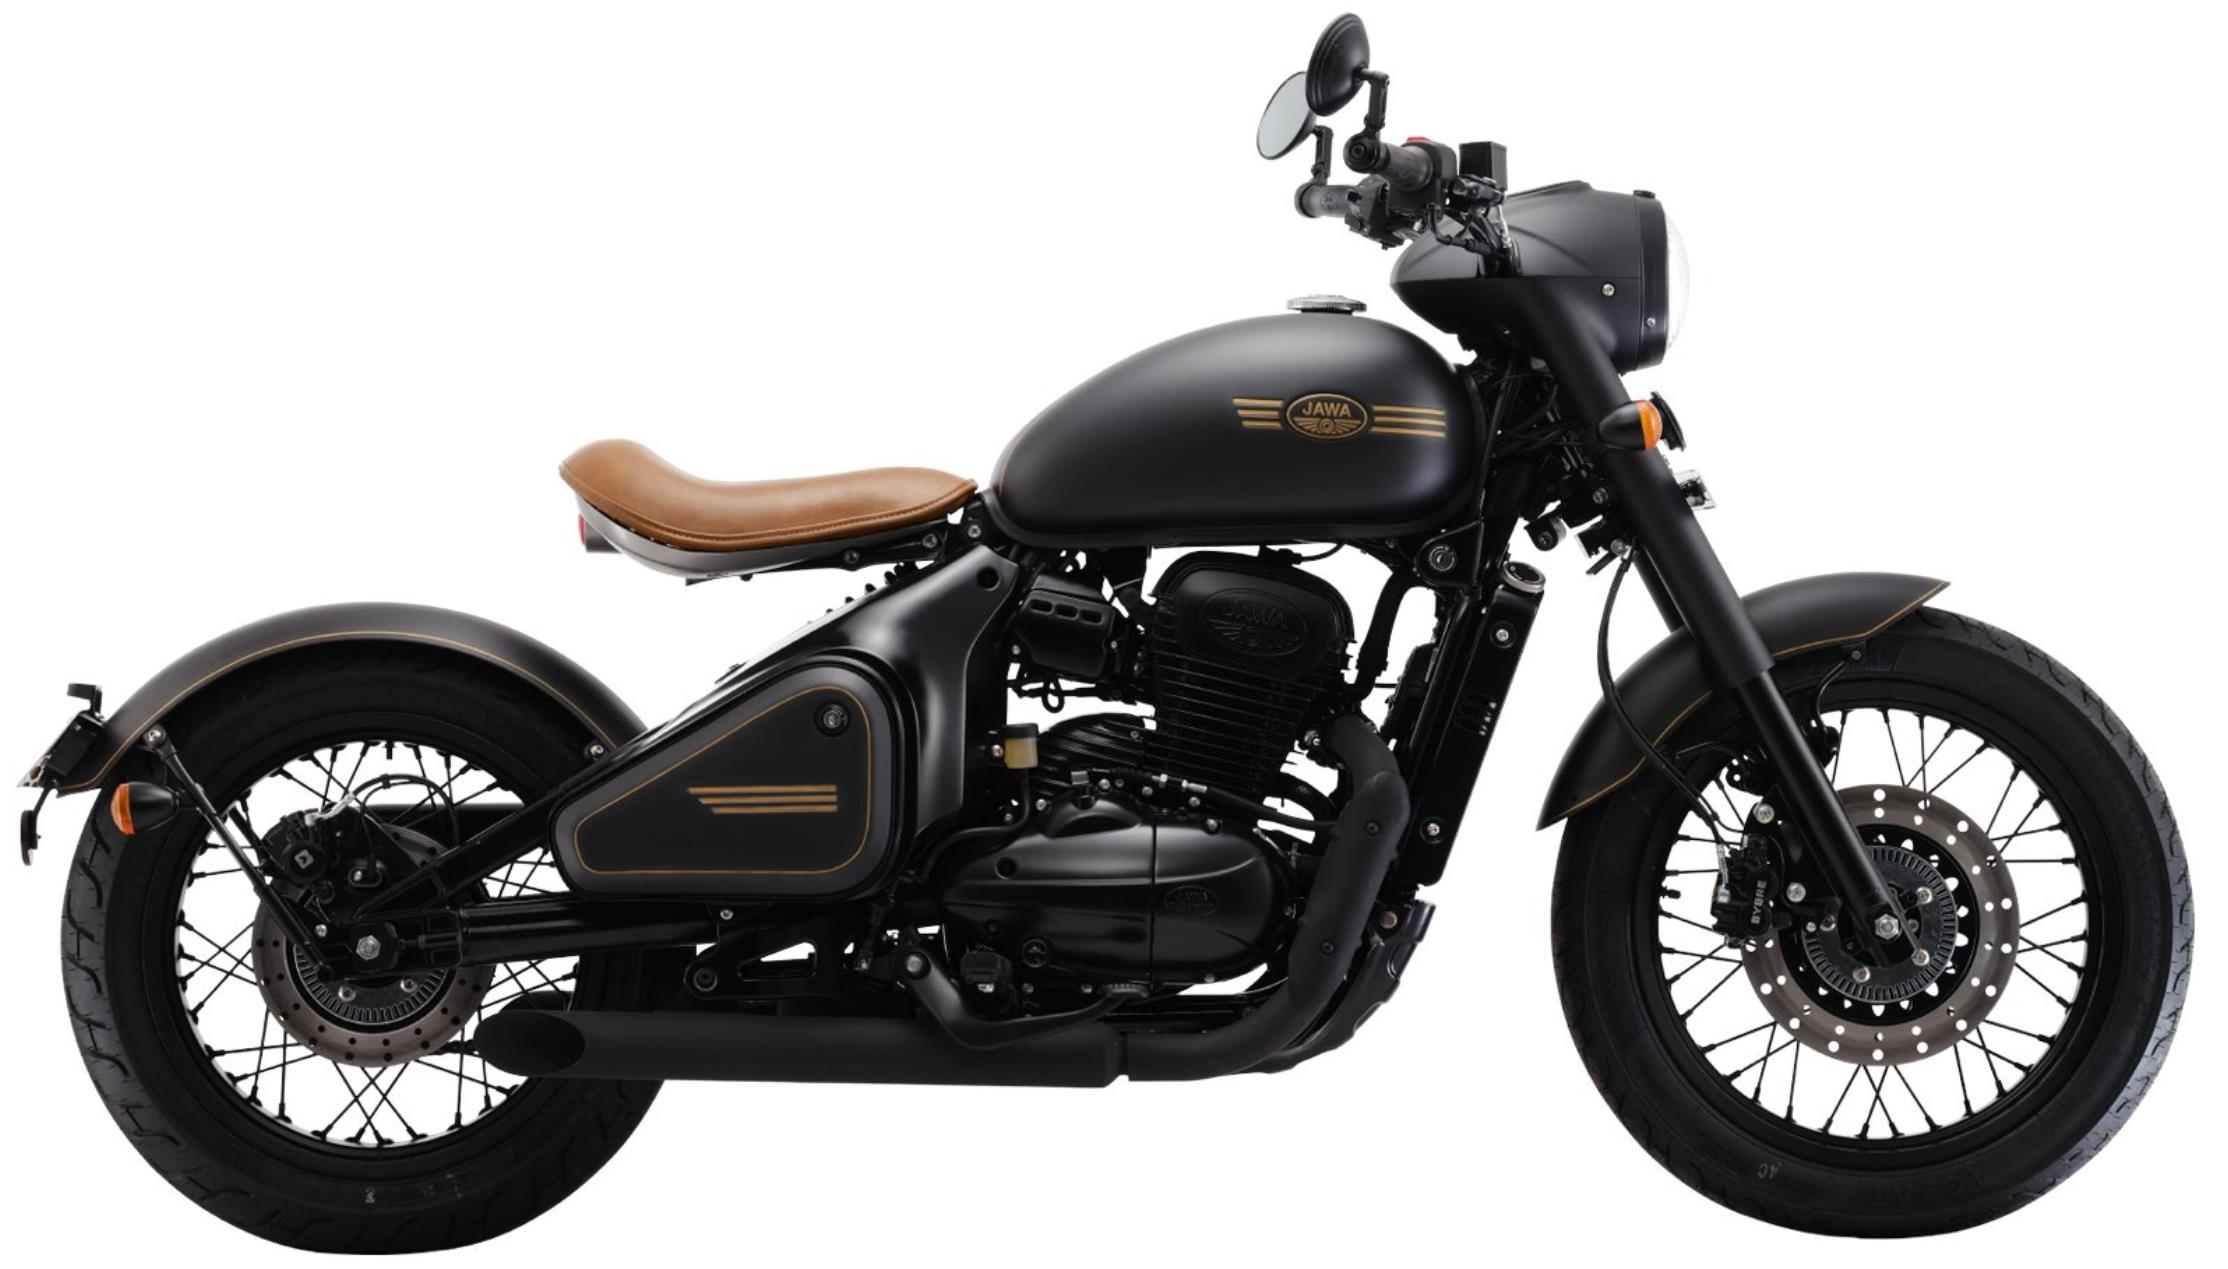 New Jawa Perak Bobber BS6 Price in India [Full Specifications]